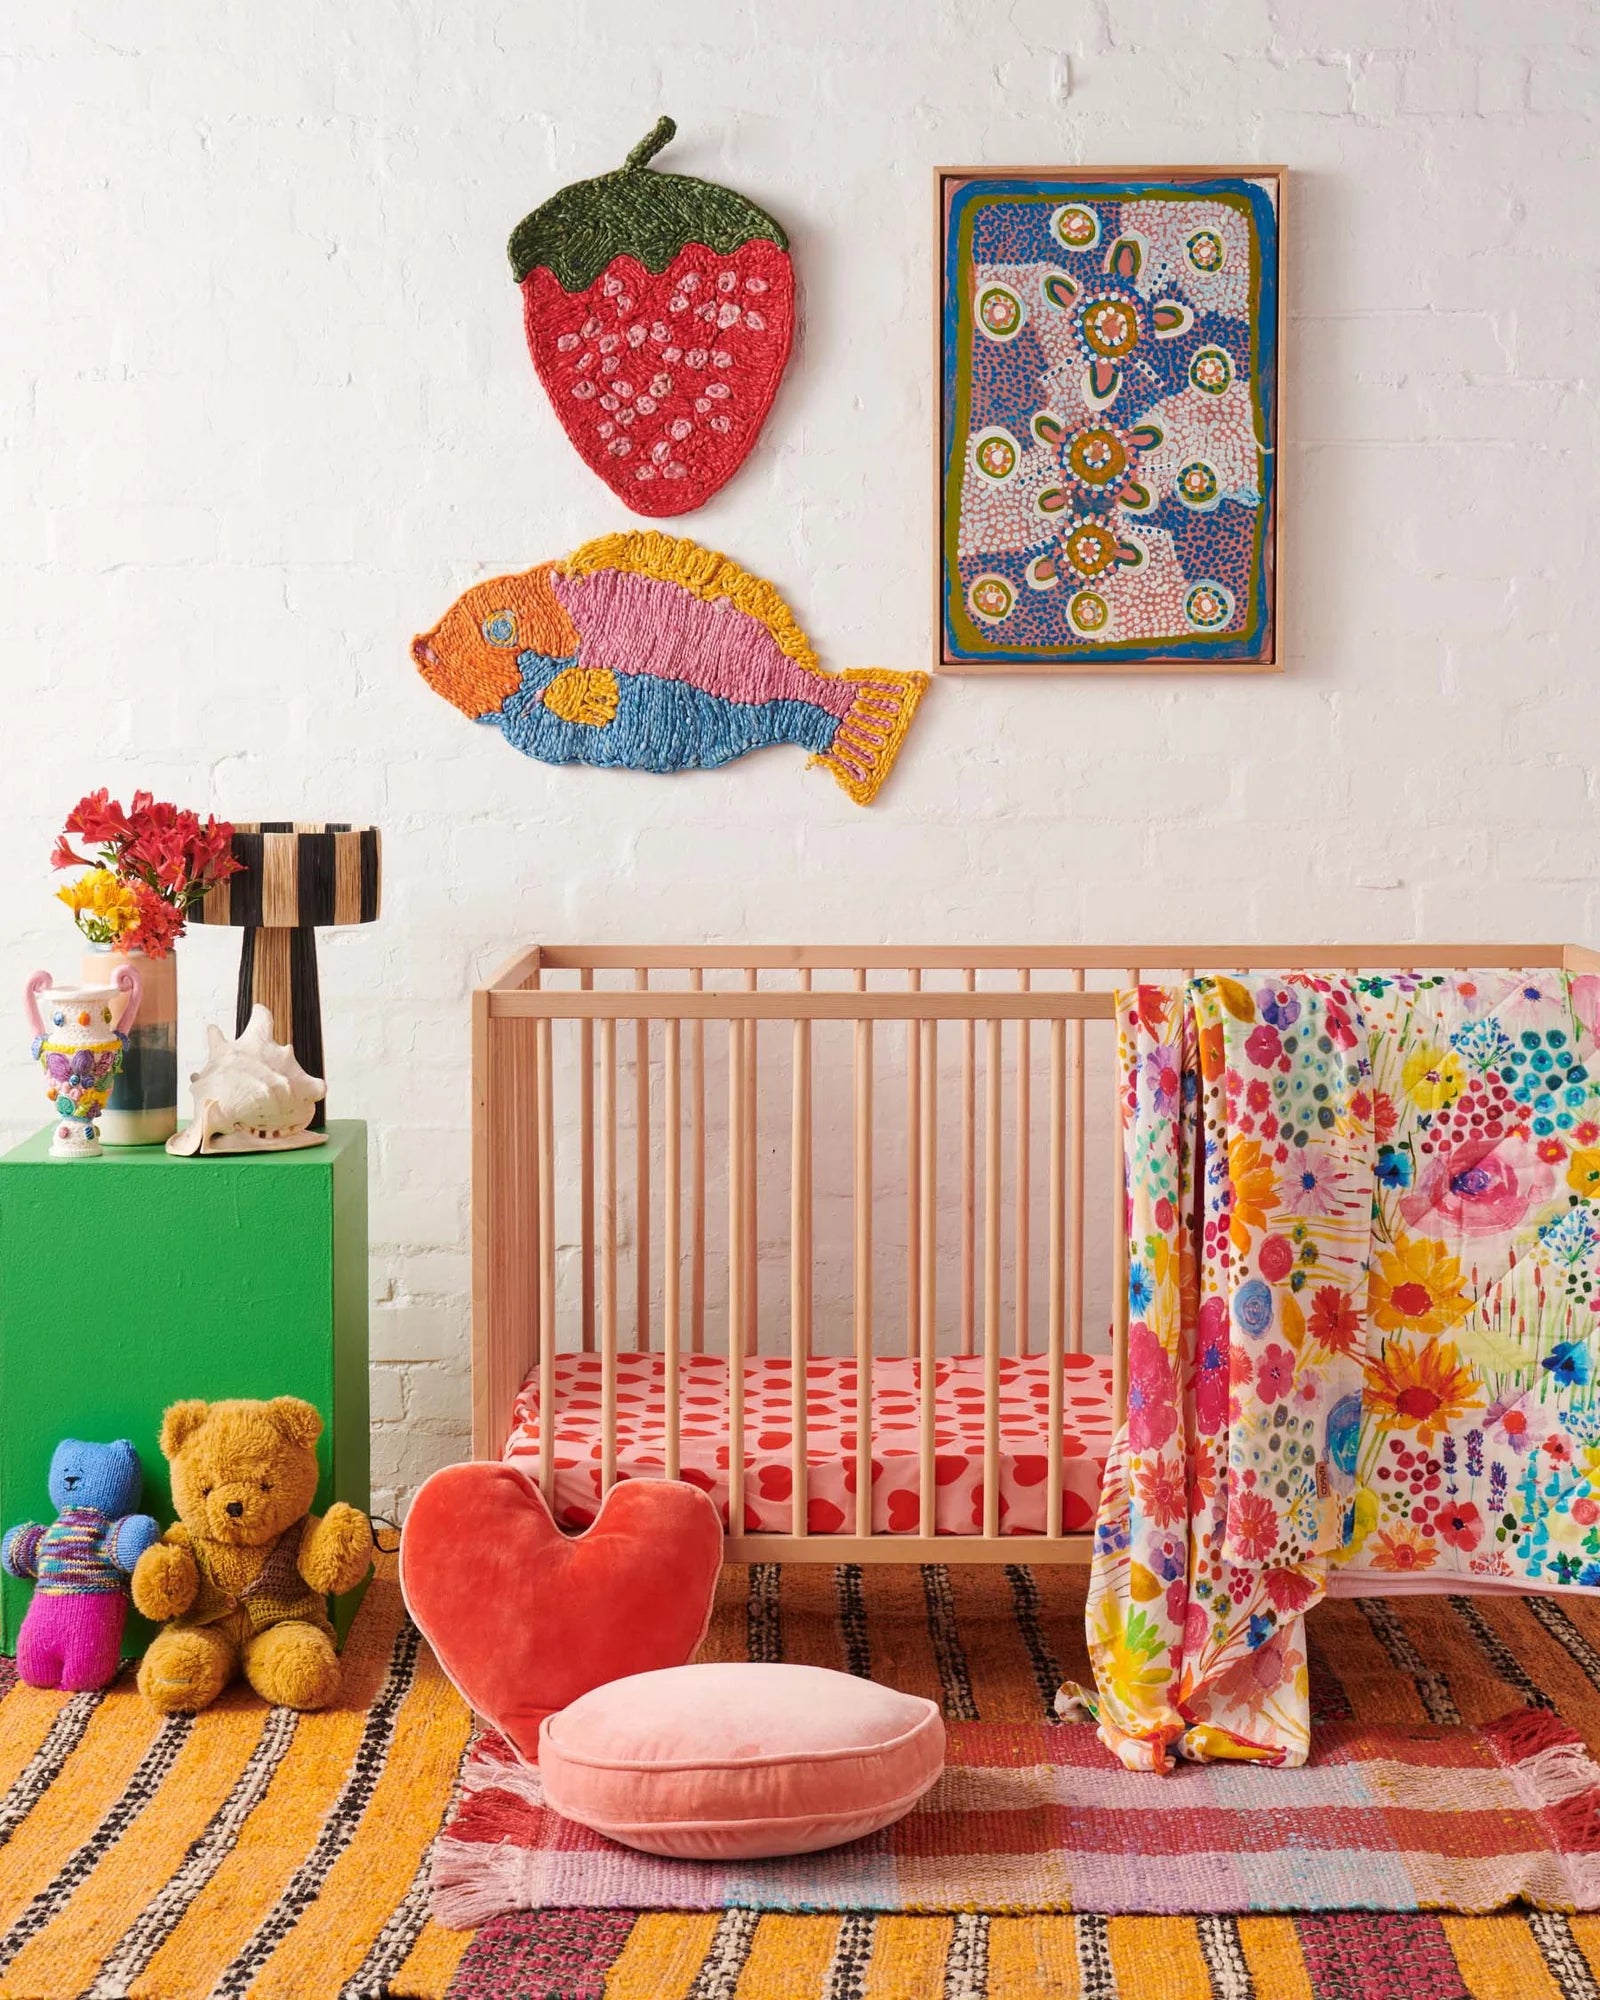 Kip & Co - Field Of Dreams in Colour Organic Cotton Quilted Cot Bedspread